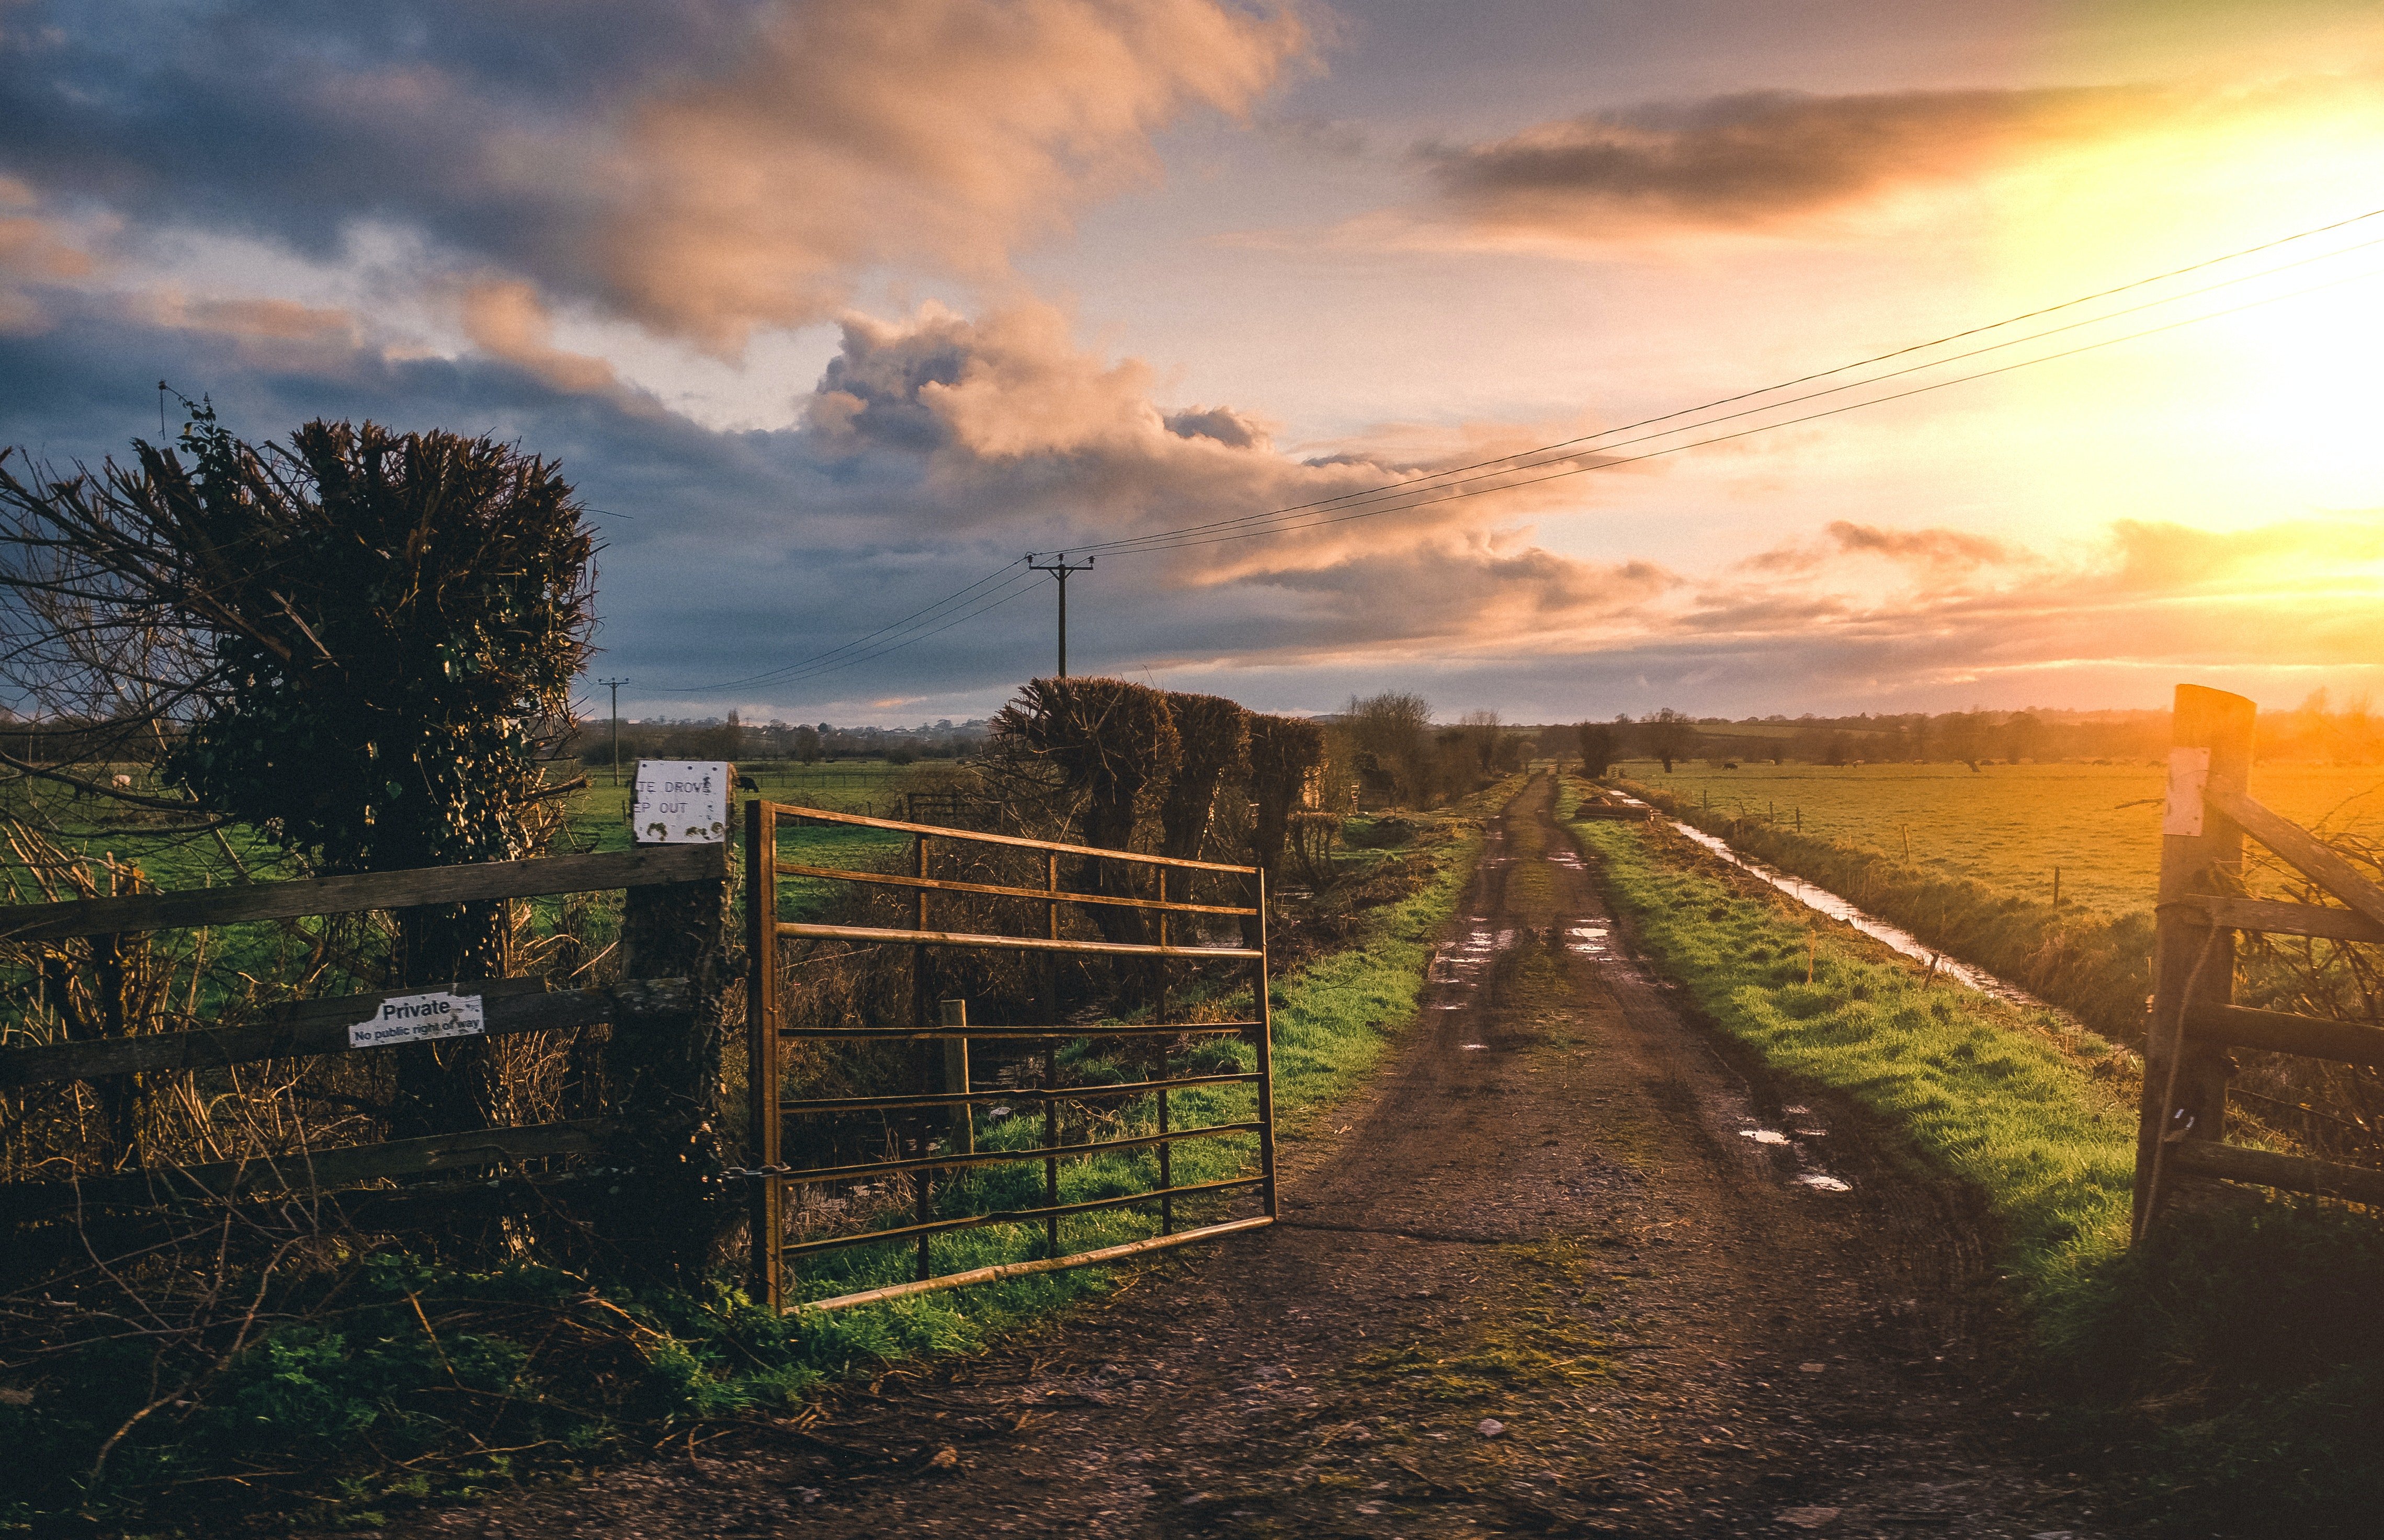 Patricia and Robbie walked around the farm, reminiscing their childhood. | Source: Pexels